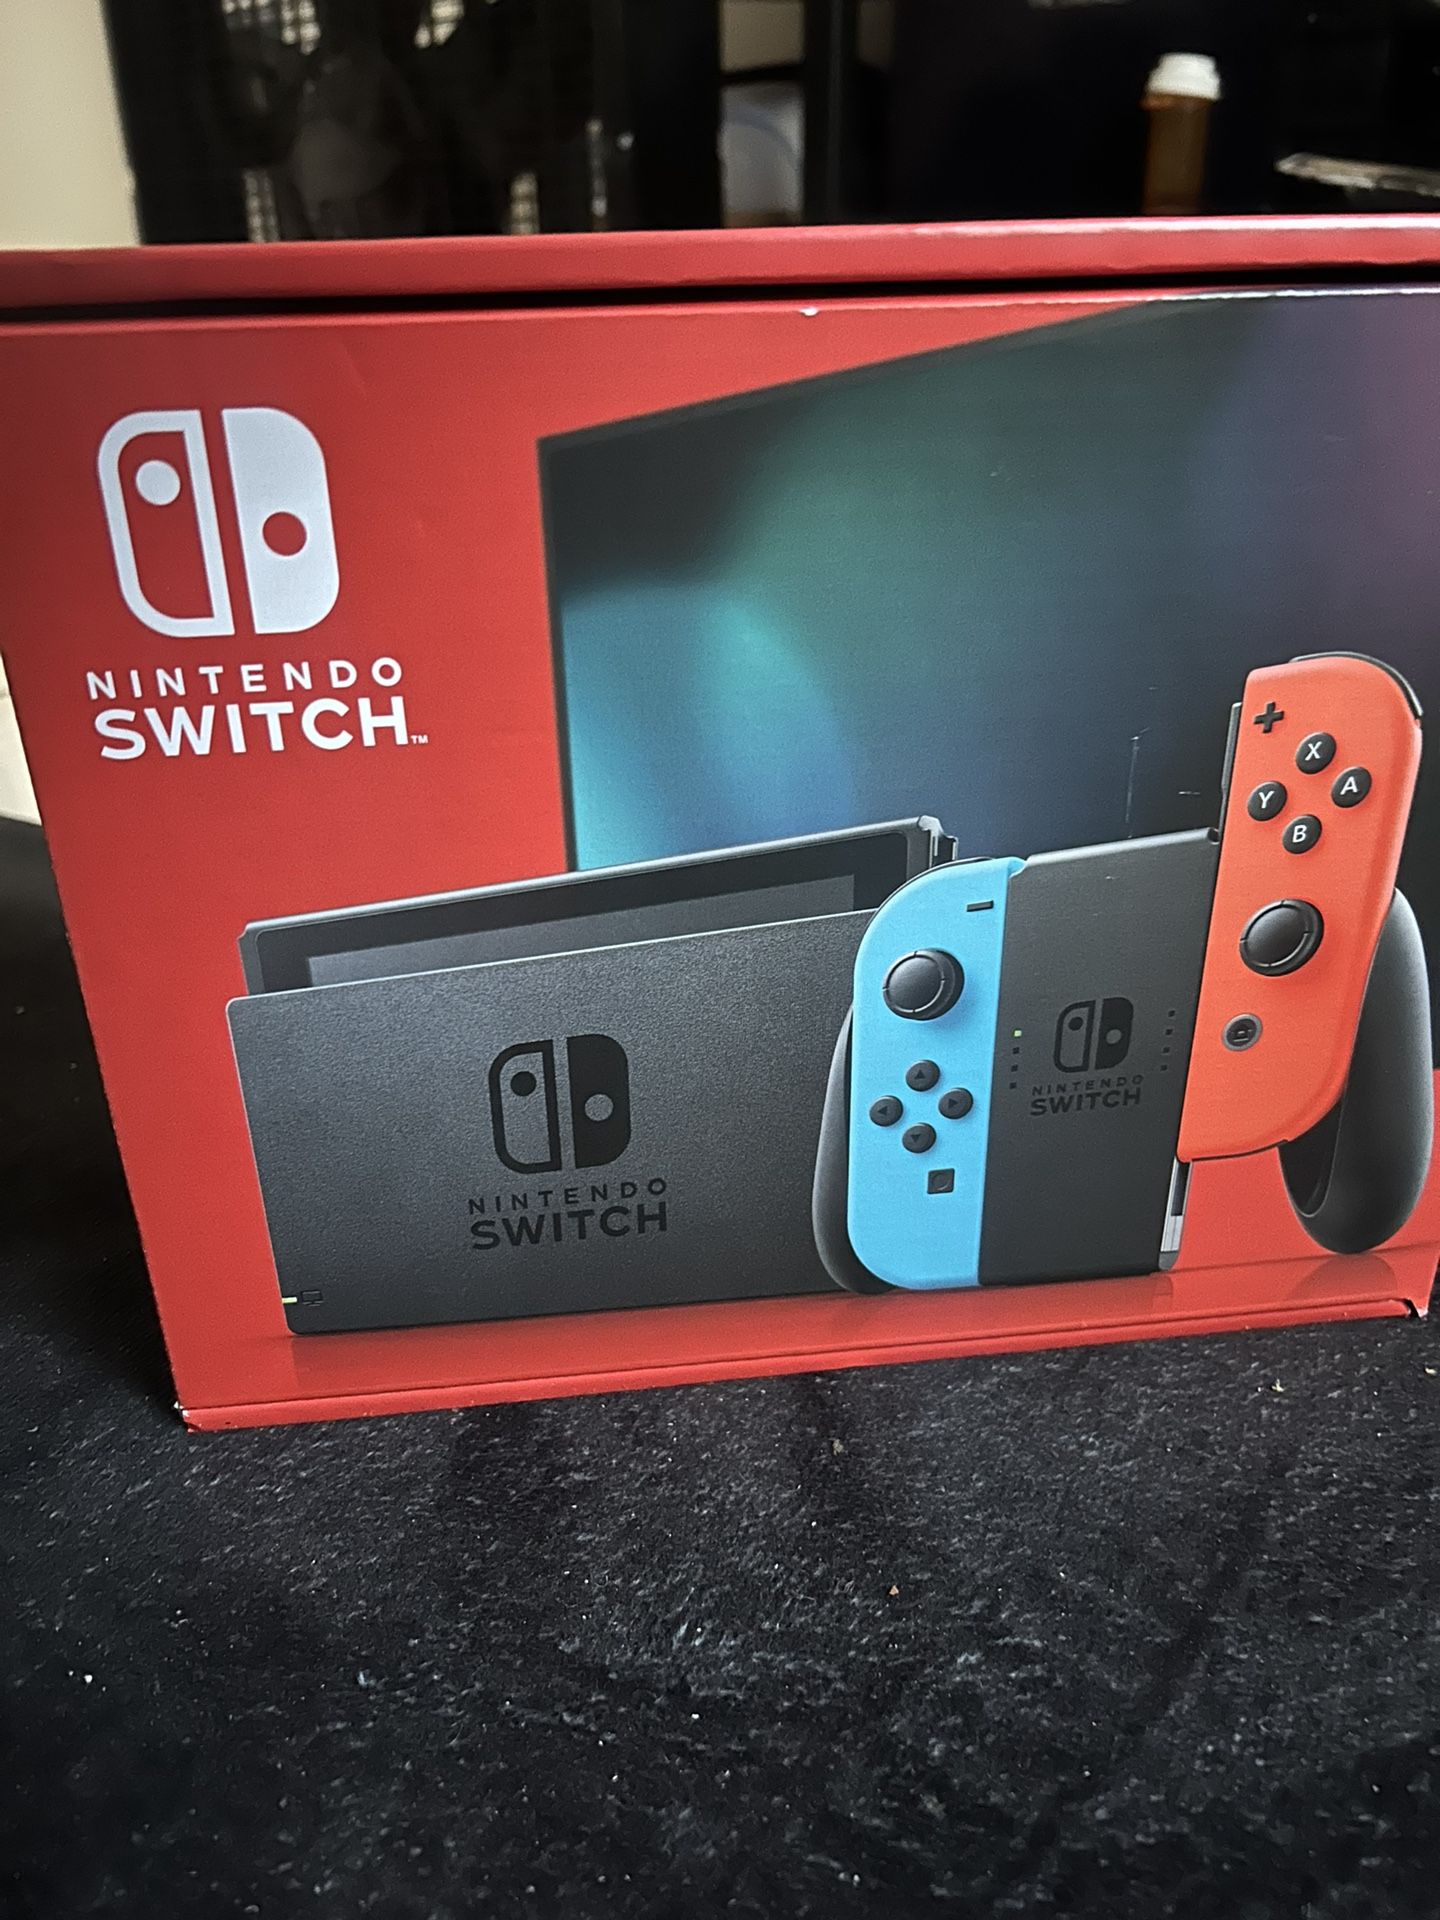 Nintendo Switch ( Red & Blue Edition ) 